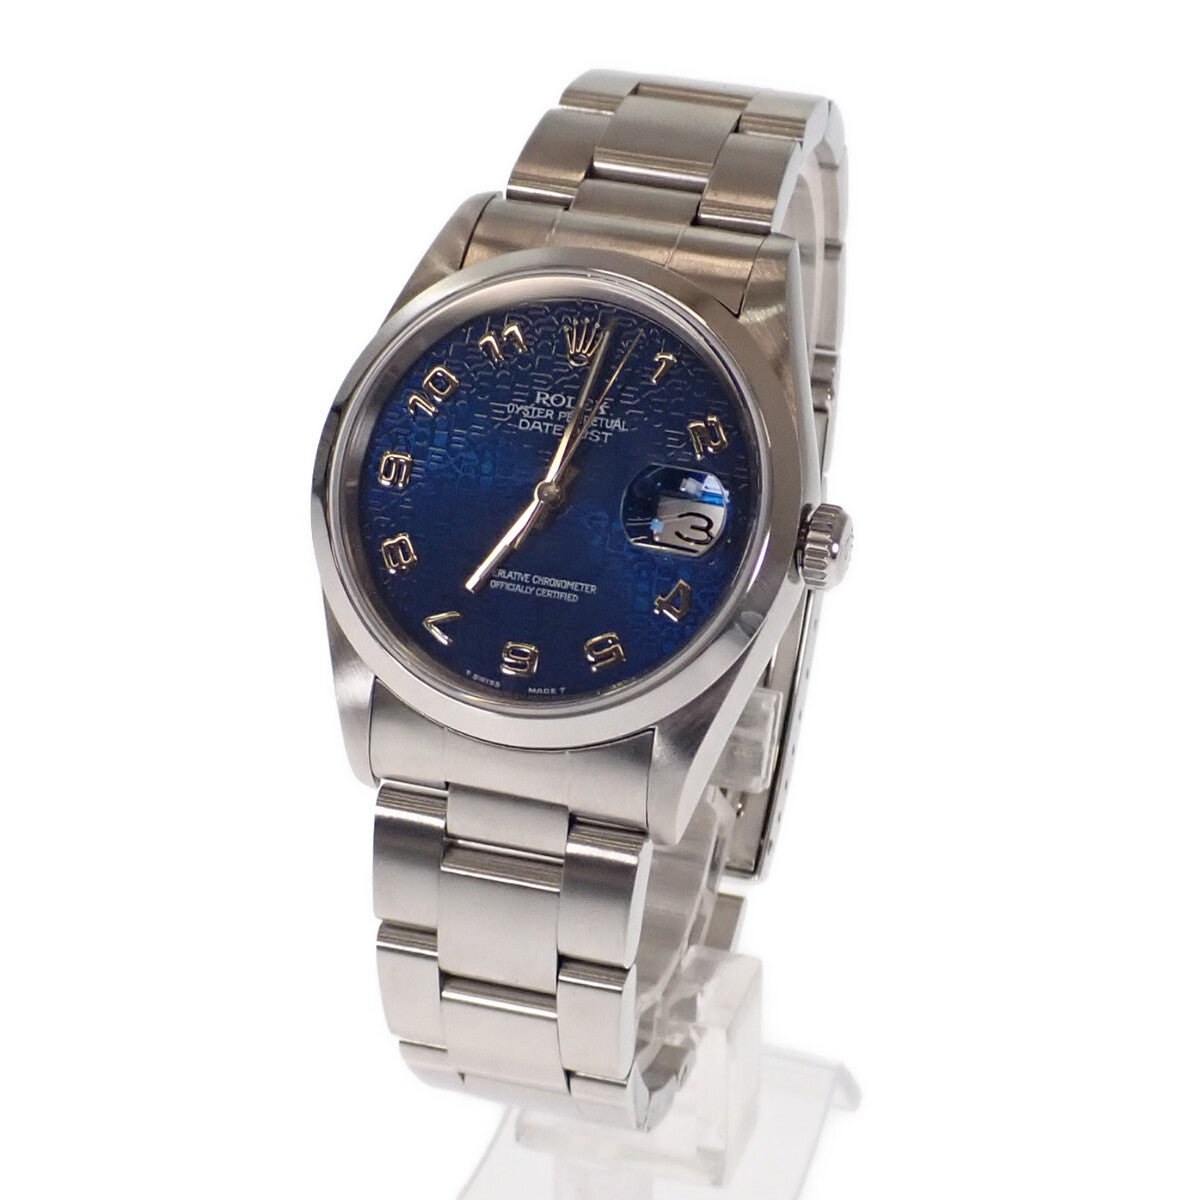 ROLEX Datejust Men's Stainless Steel Wristwatch with Blue Dial - Used 16200.0